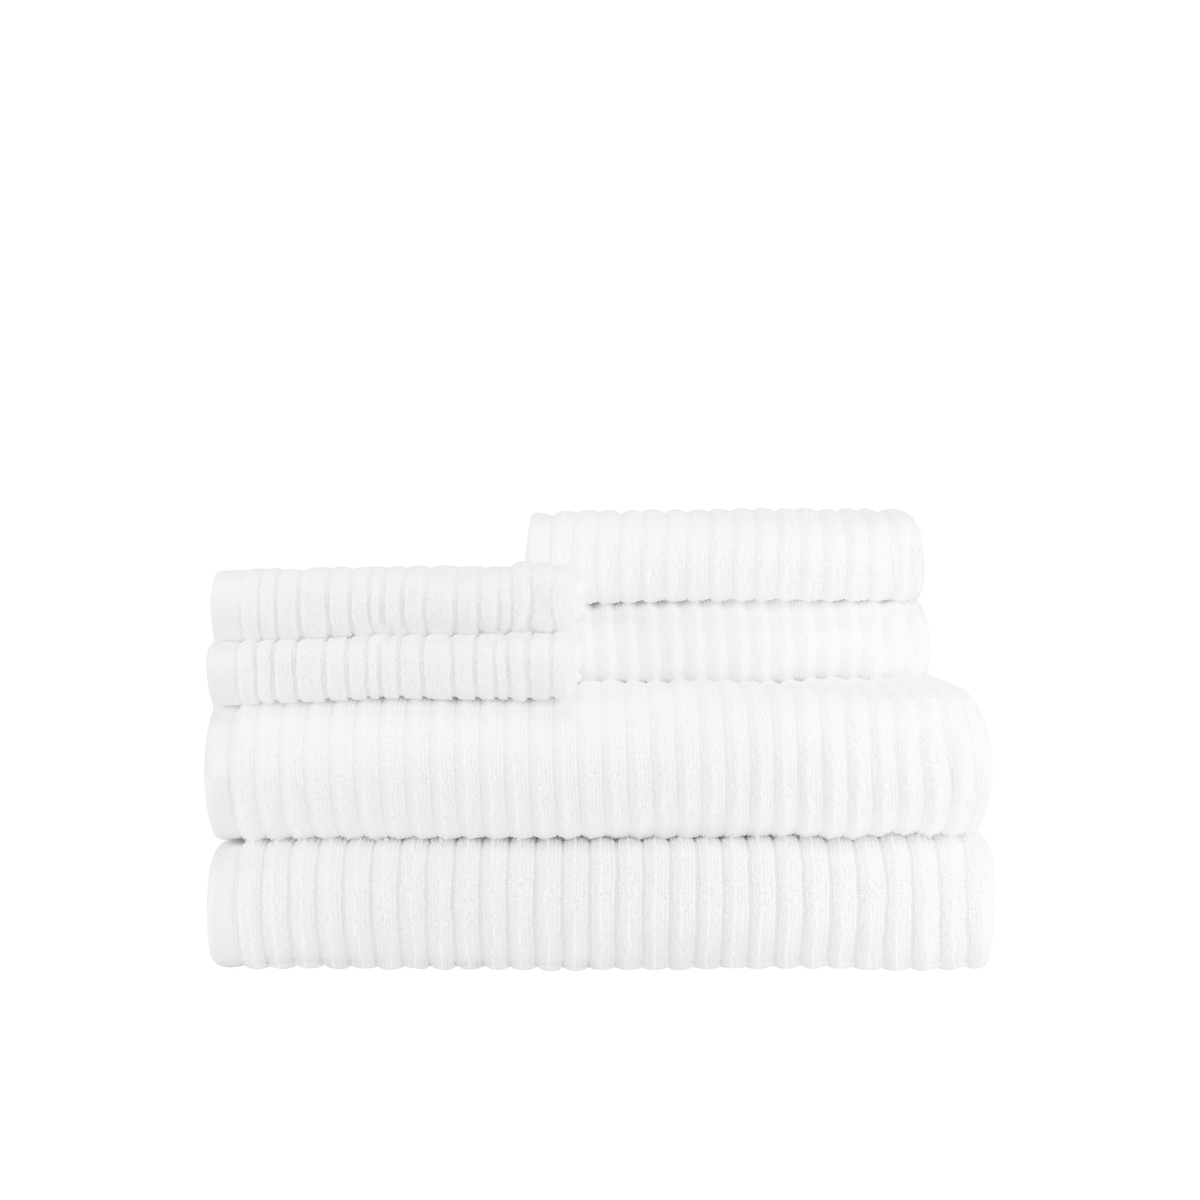 https://ak1.ostkcdn.com/images/products/is/images/direct/6ba3242a4bc7e8ac18a78b9e17b6139ecc33fbcf/Caro-Home-Infinity-Rib-Towels.jpg